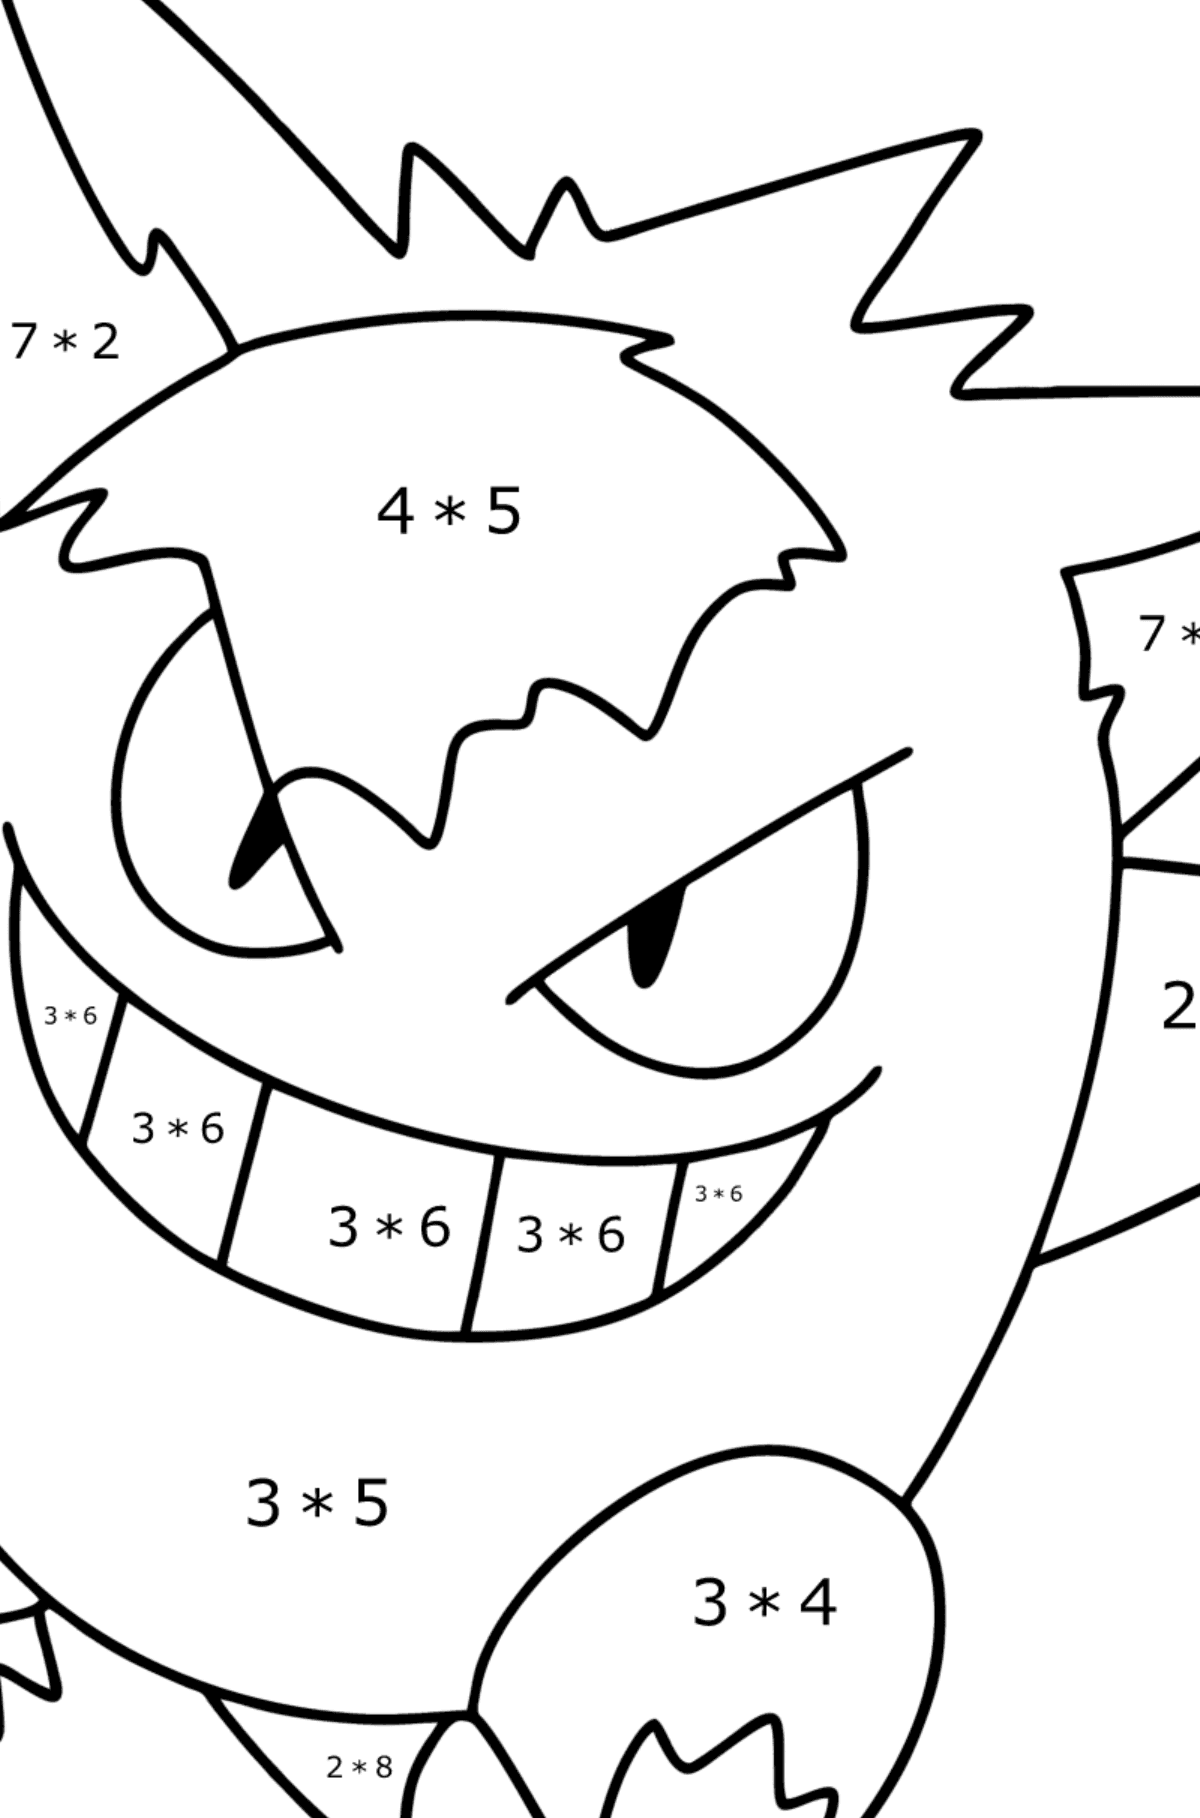 Pokémon Go Gengar coloring page - Math Coloring - Multiplication for Kids